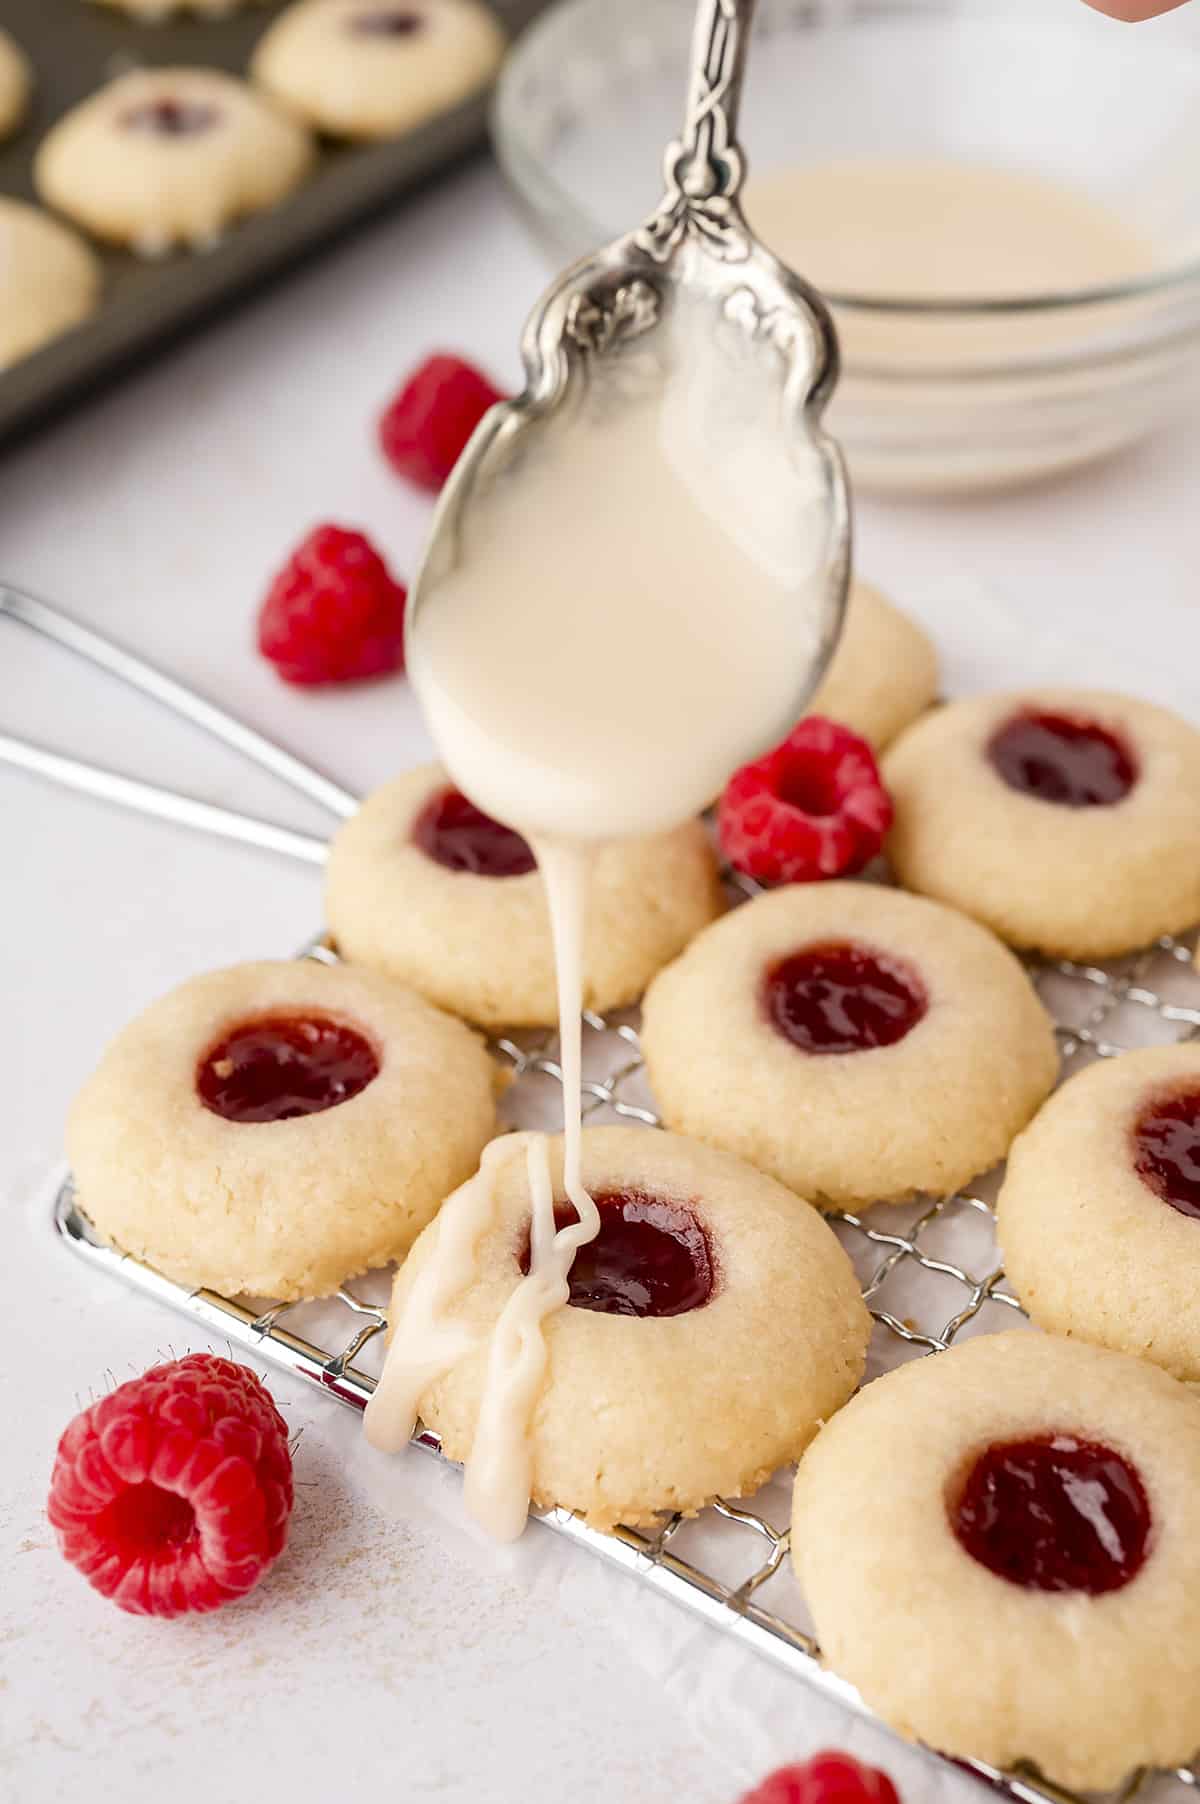 Spoonful of glaze being drizzled over thumbprint cookies on wire rack.